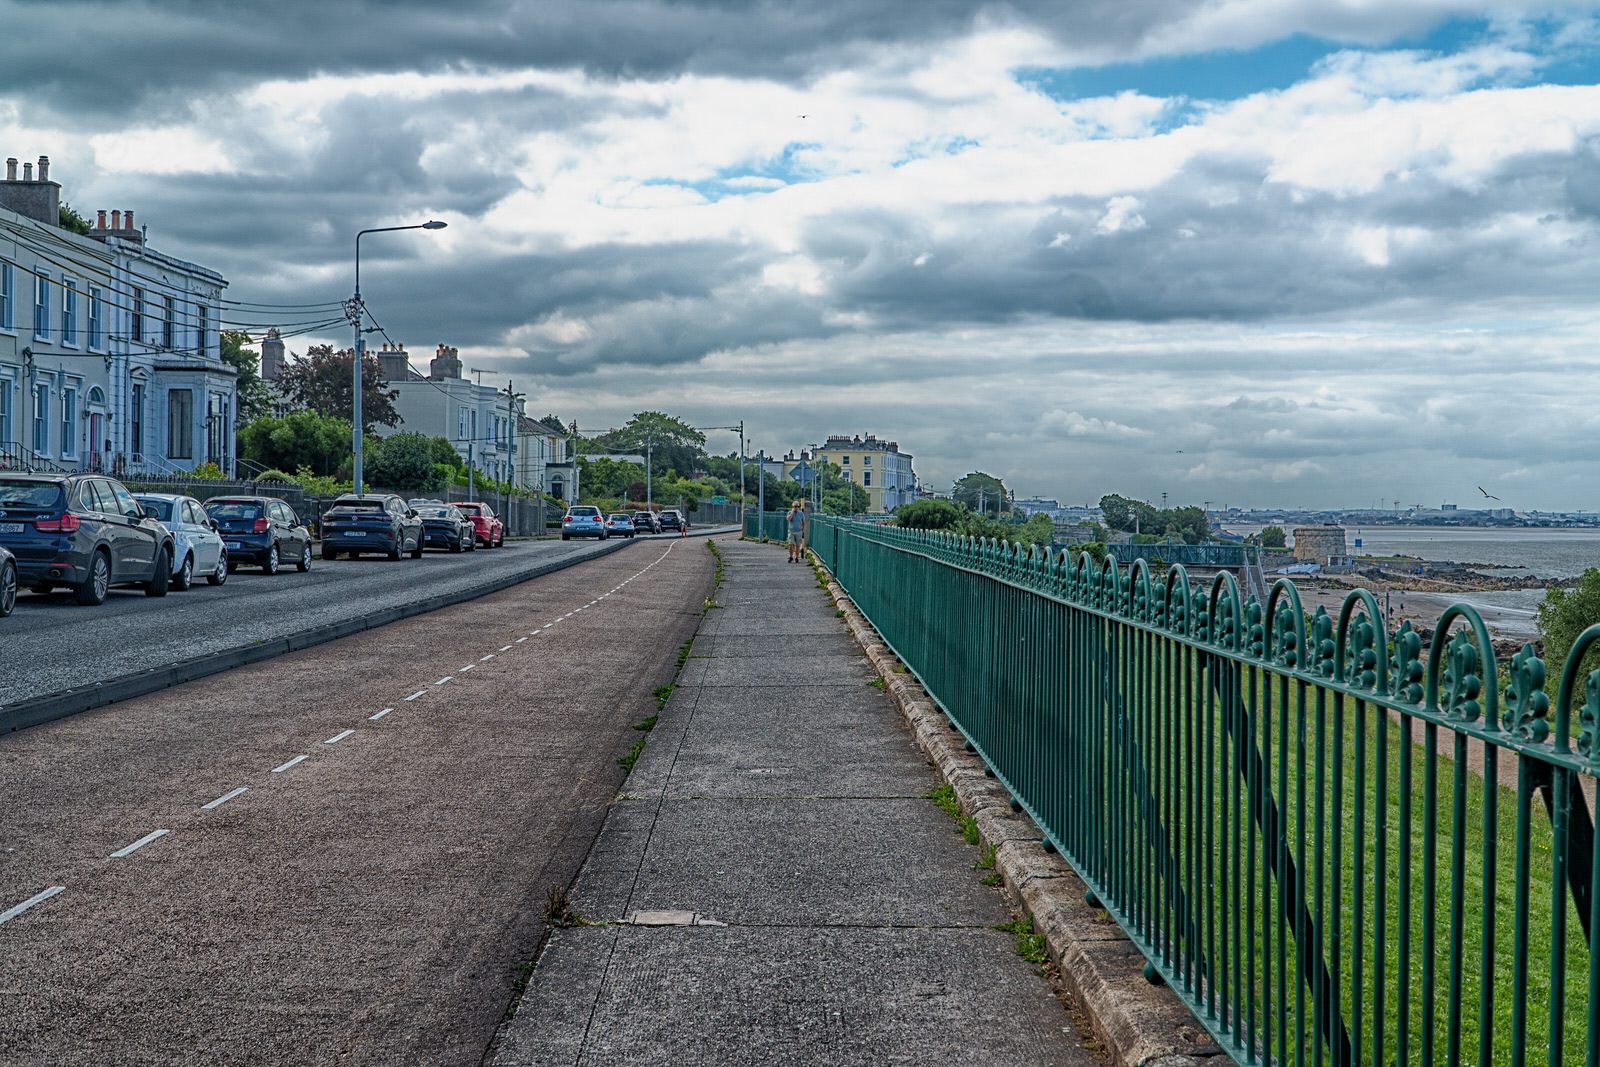 LONGFORD TERRACE AND CLOSE BY [SALTHILL AND MONKSTOWN TRAIN STATION] 006